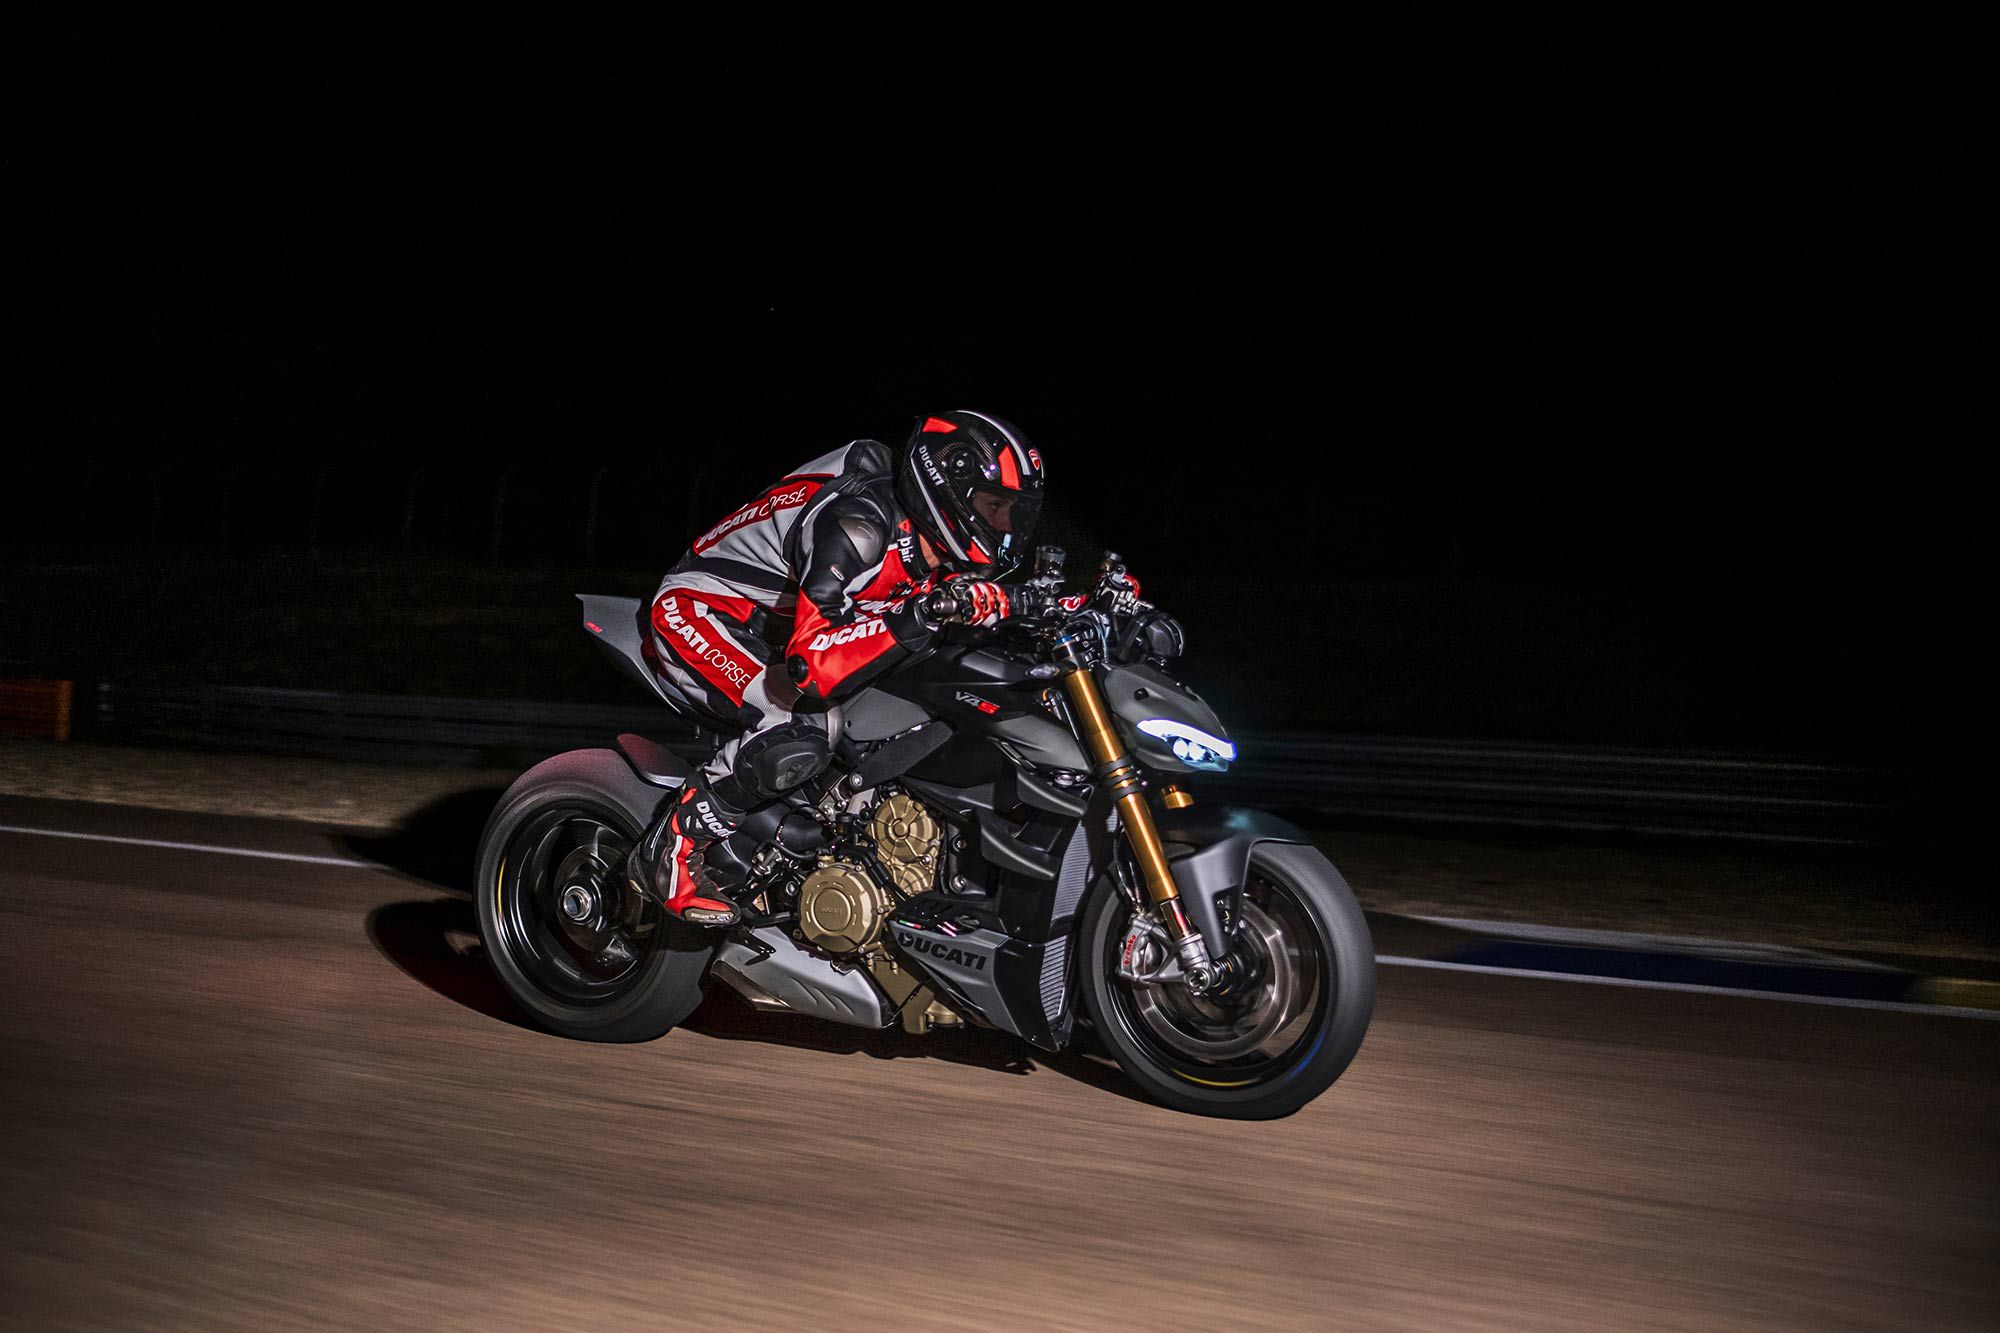 Careful with the flash, man! The Ducati Streetfighter V4 S shows off some night moves.